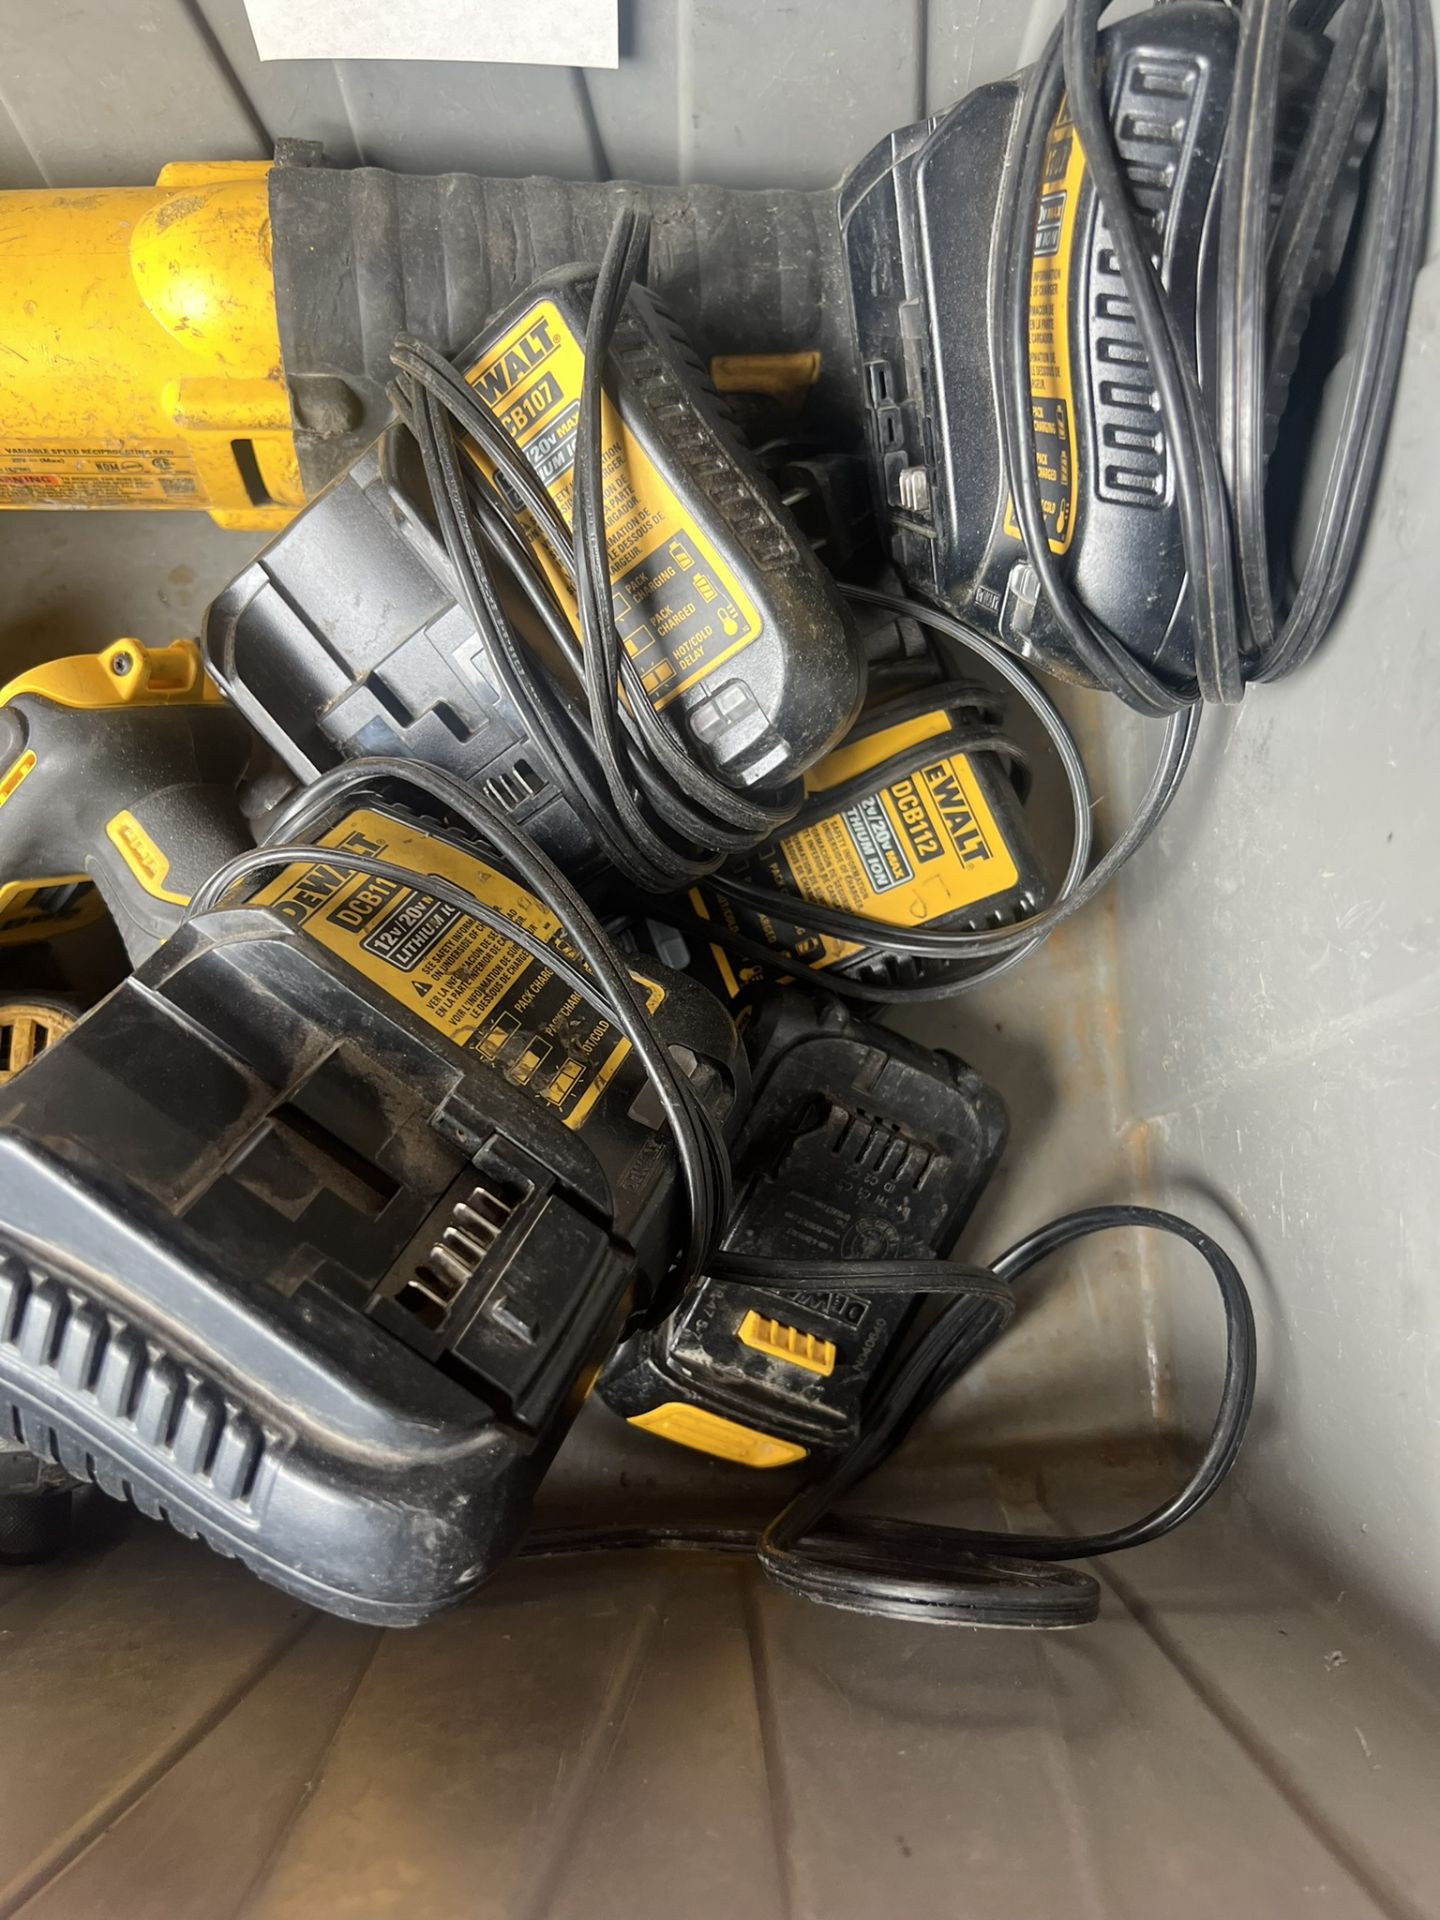 Tote with Cordless DeWalt Lights, SawsAlls, Drills, Chargers & Batteries - Image 2 of 2